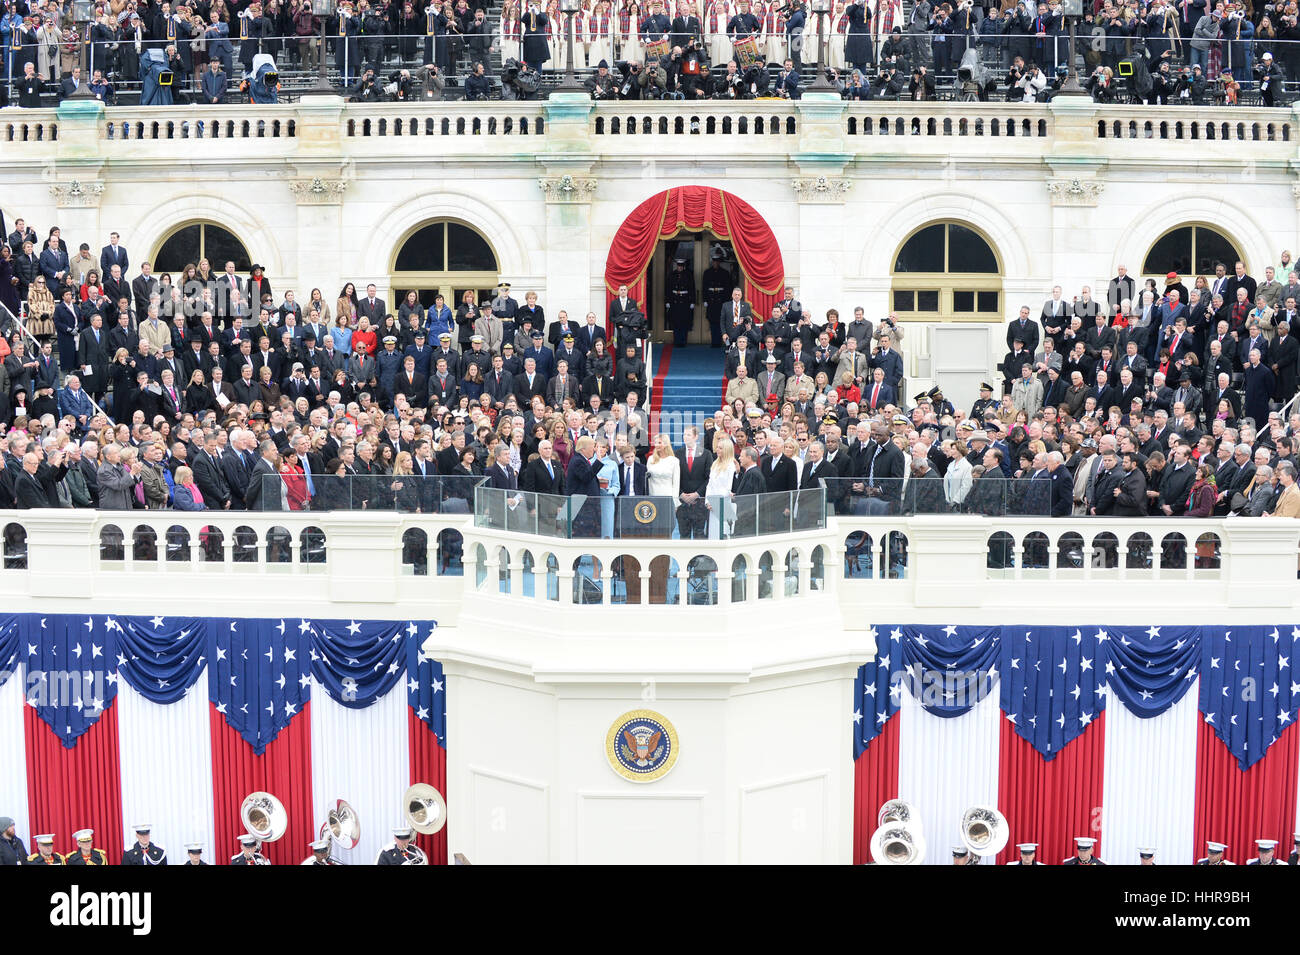 Washington DC, USA. 20th Jan, 2017. President Donald Trump takes the Oath of Office at his inauguration on January 20, 2017 in Washington, DC Trump became the 45th President of the United States. Credit: MediaPunch Inc/Alamy Live News Stock Photo